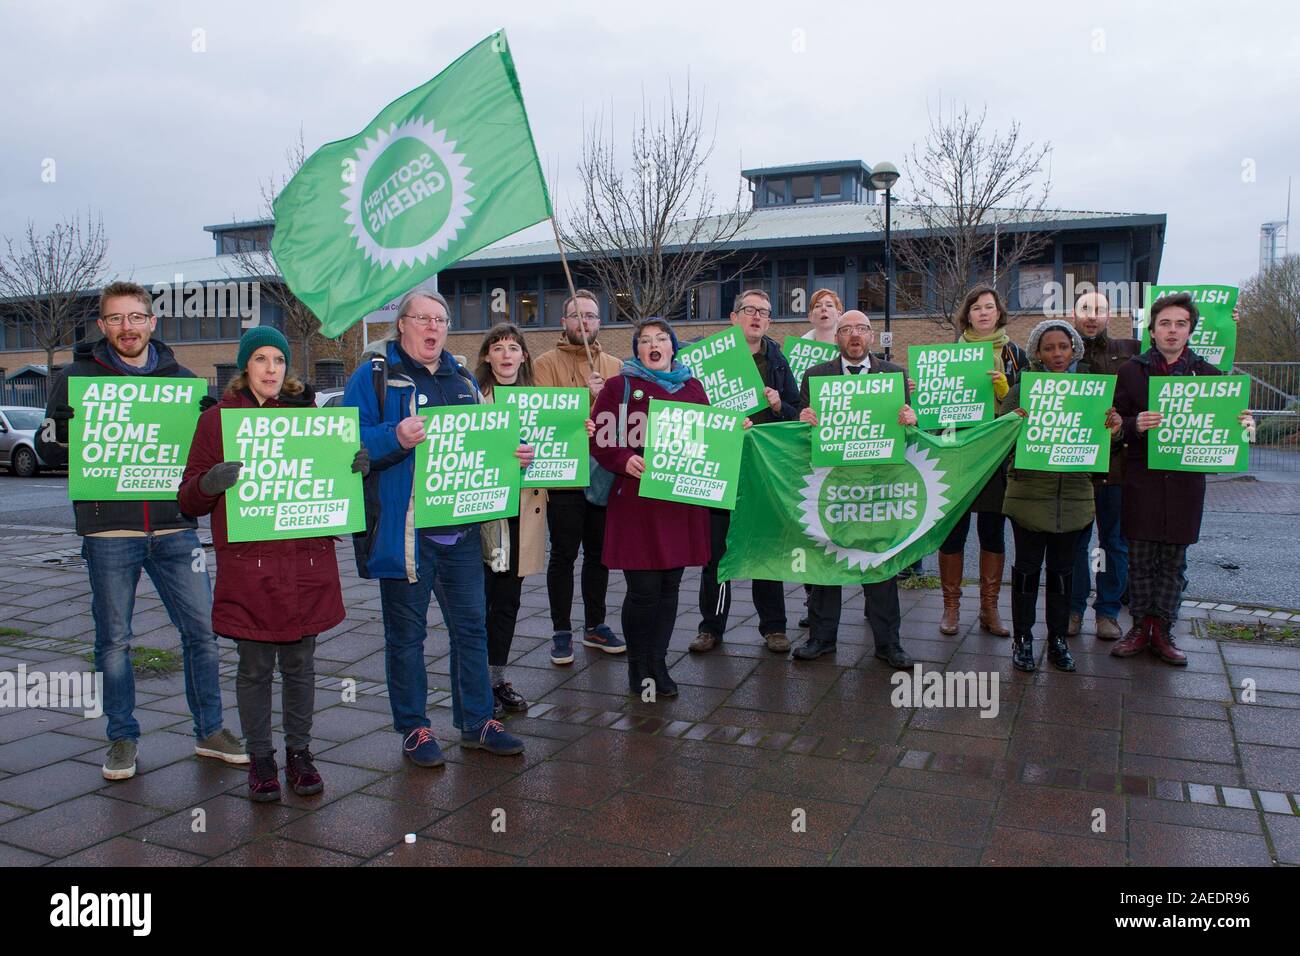 Glasgow, UK. 22 November 2019. Pictured: Patrick Harvie MSP - Co Leader of the Scottish Green Party campaigns with local candidates, councillors and party members for the abolition of the home office.  Credit: Colin Fisher/Alamy Live News. Stock Photo